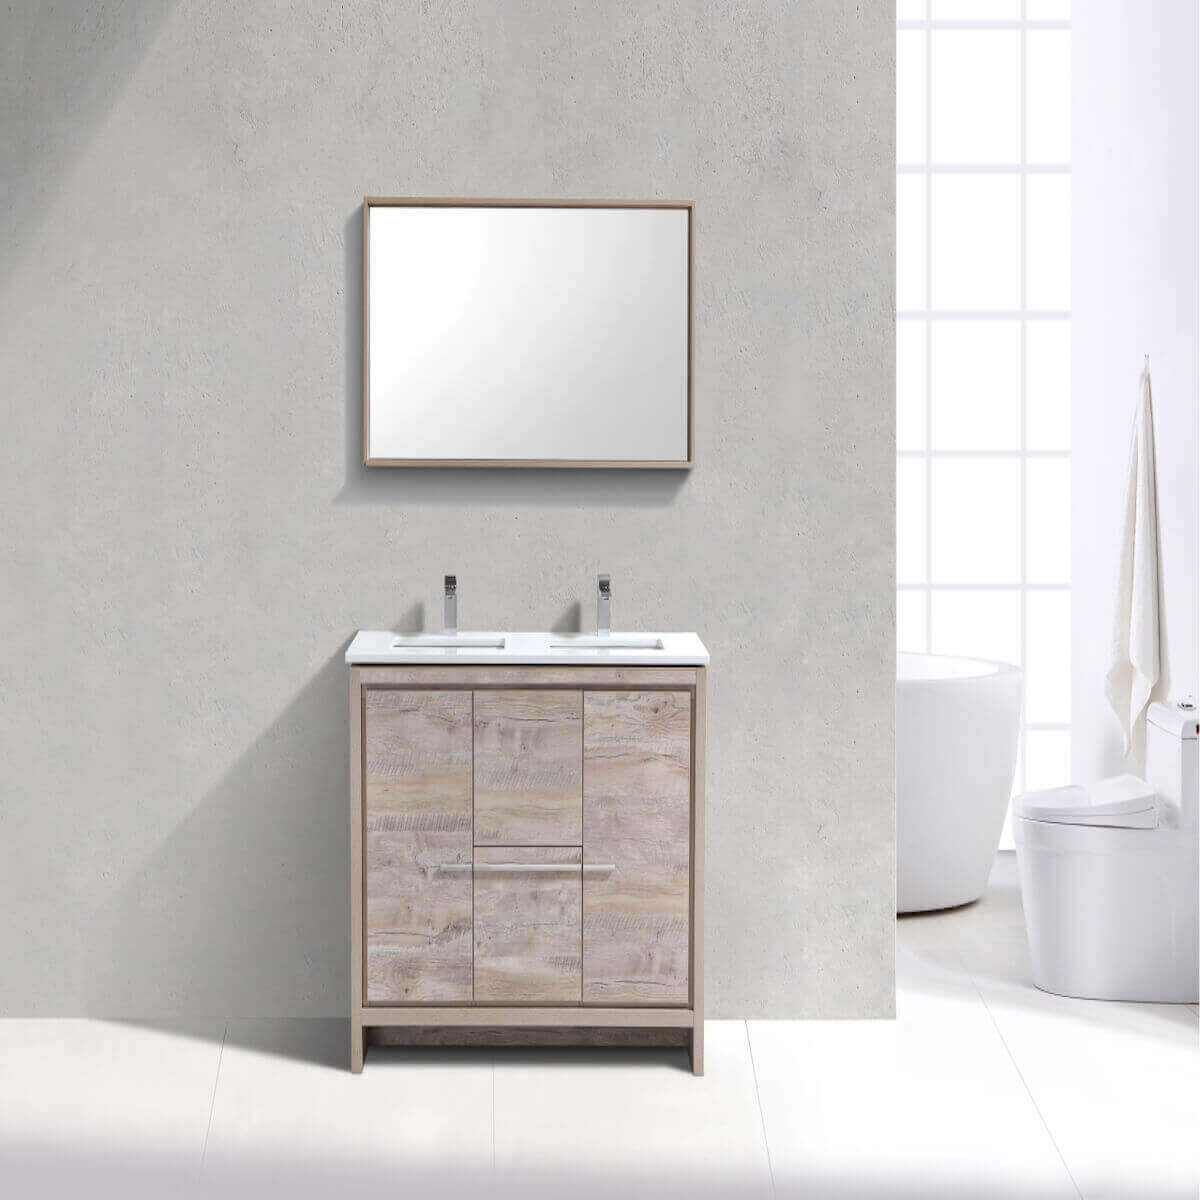 KubeBath Dolce 48" Nature Wood Freestanding Double Vanity with Quartz Countertop AD648DNW in Bathroom #finish_nature wood